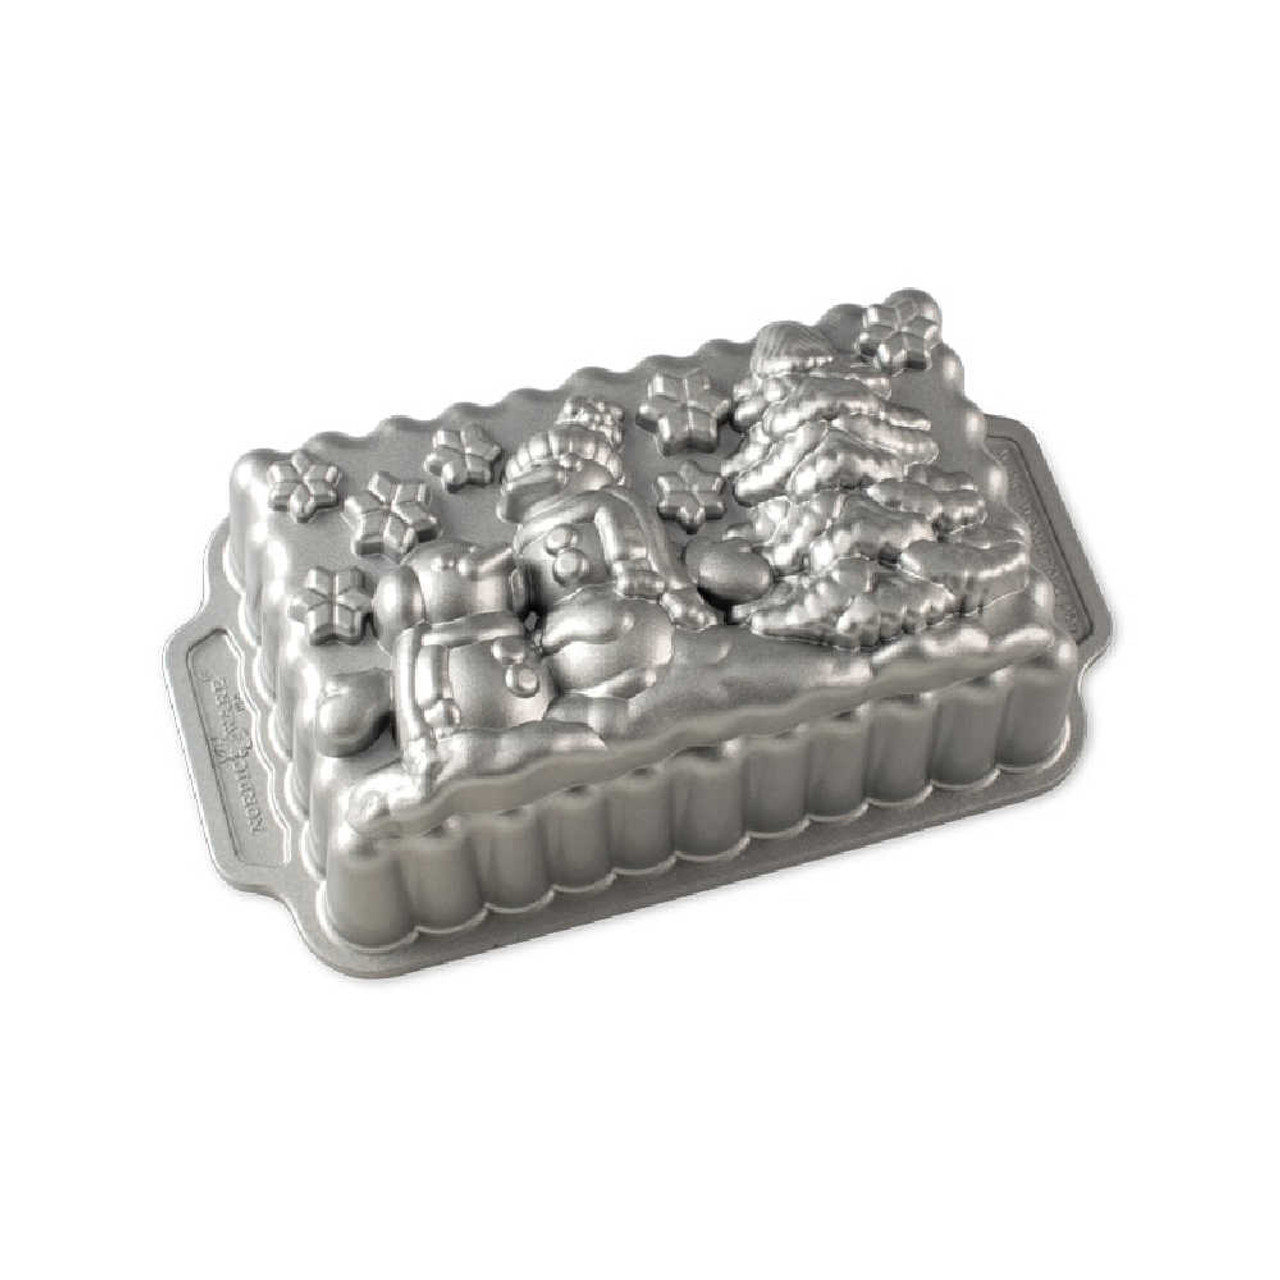 Nordic Ware 8-Cup Holiday Mini Loaf Pan